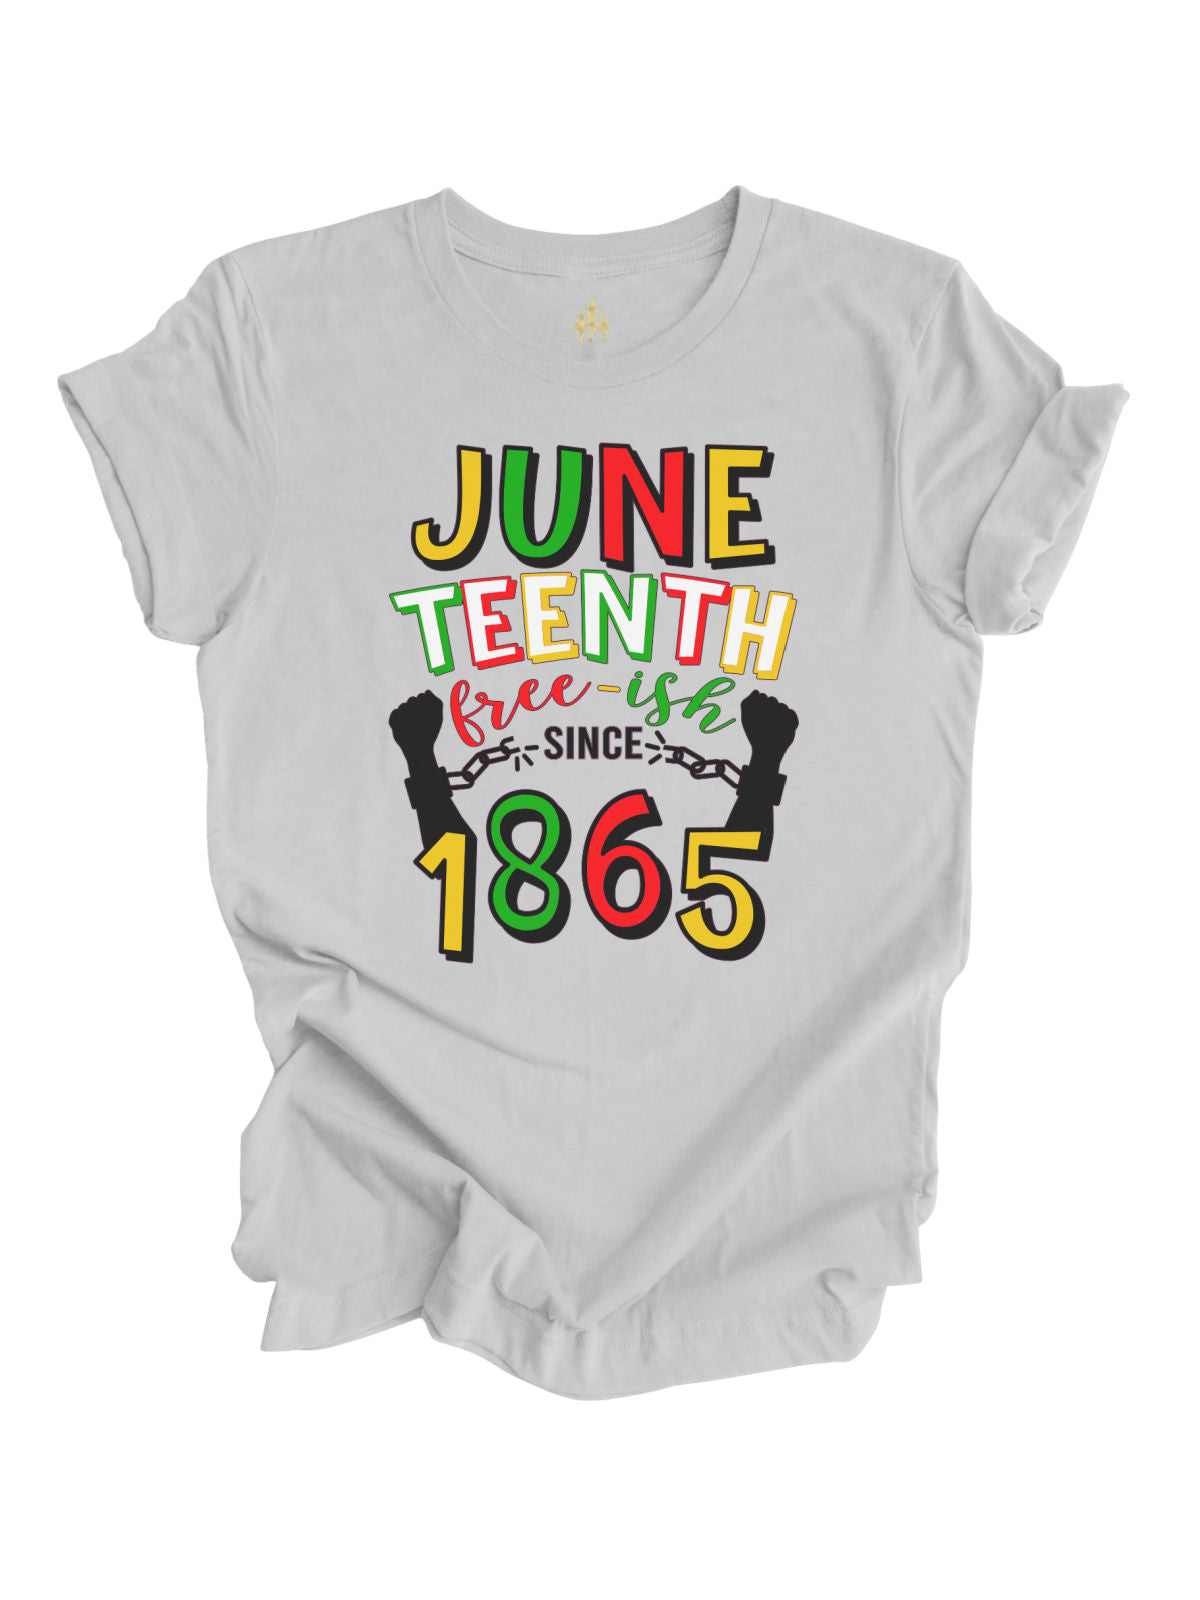 Juneteenth Free-ish Since 1865 Freedom Day Shirt for Adults in Gray